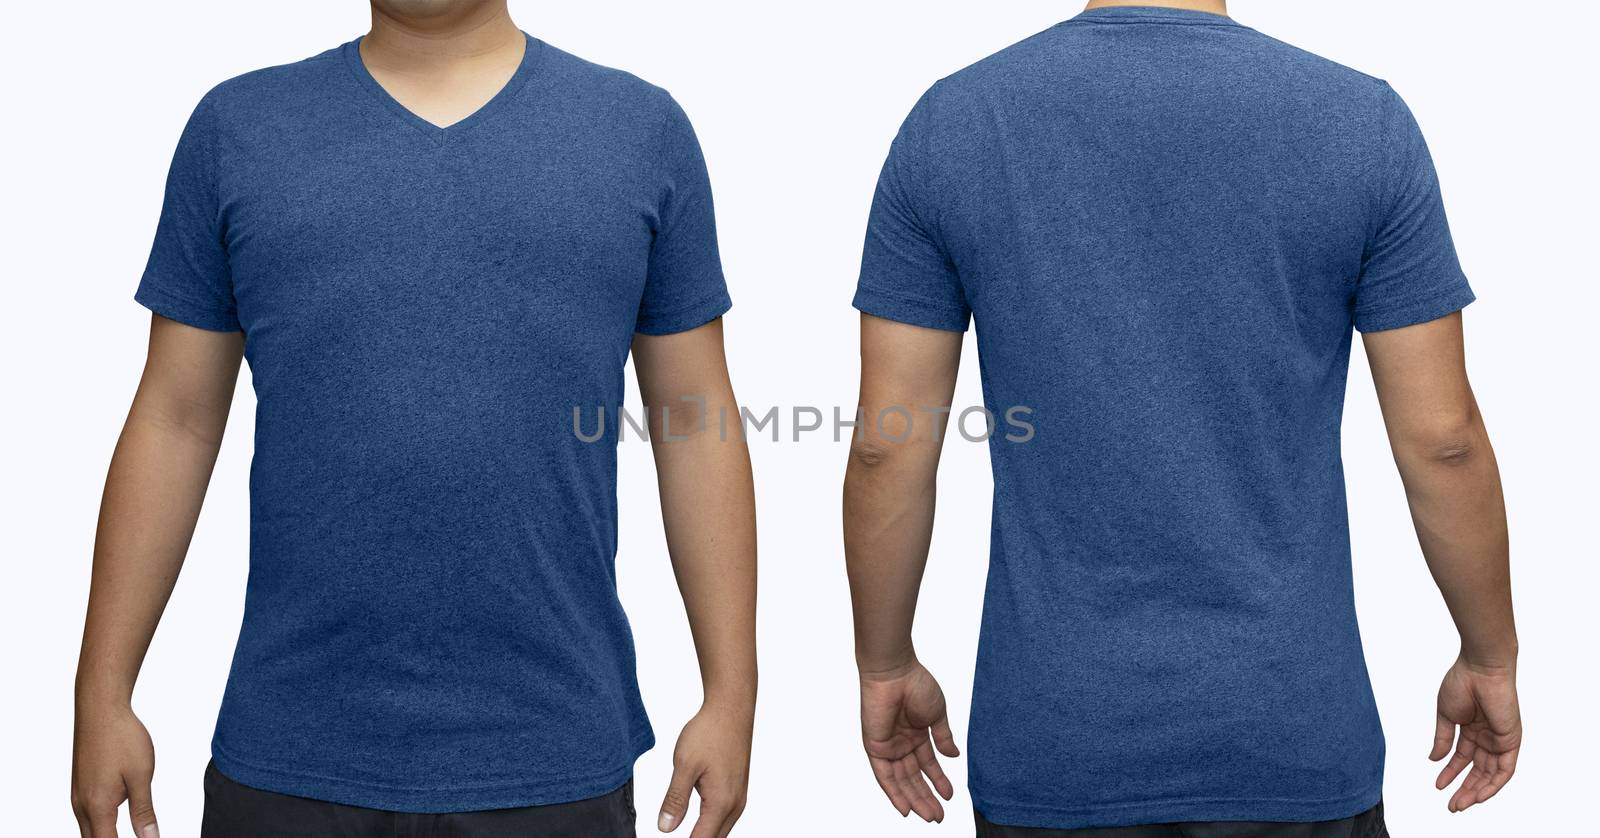 Blue blank v-neck t-shirt on human body for graphic design mock  by Charnsitr